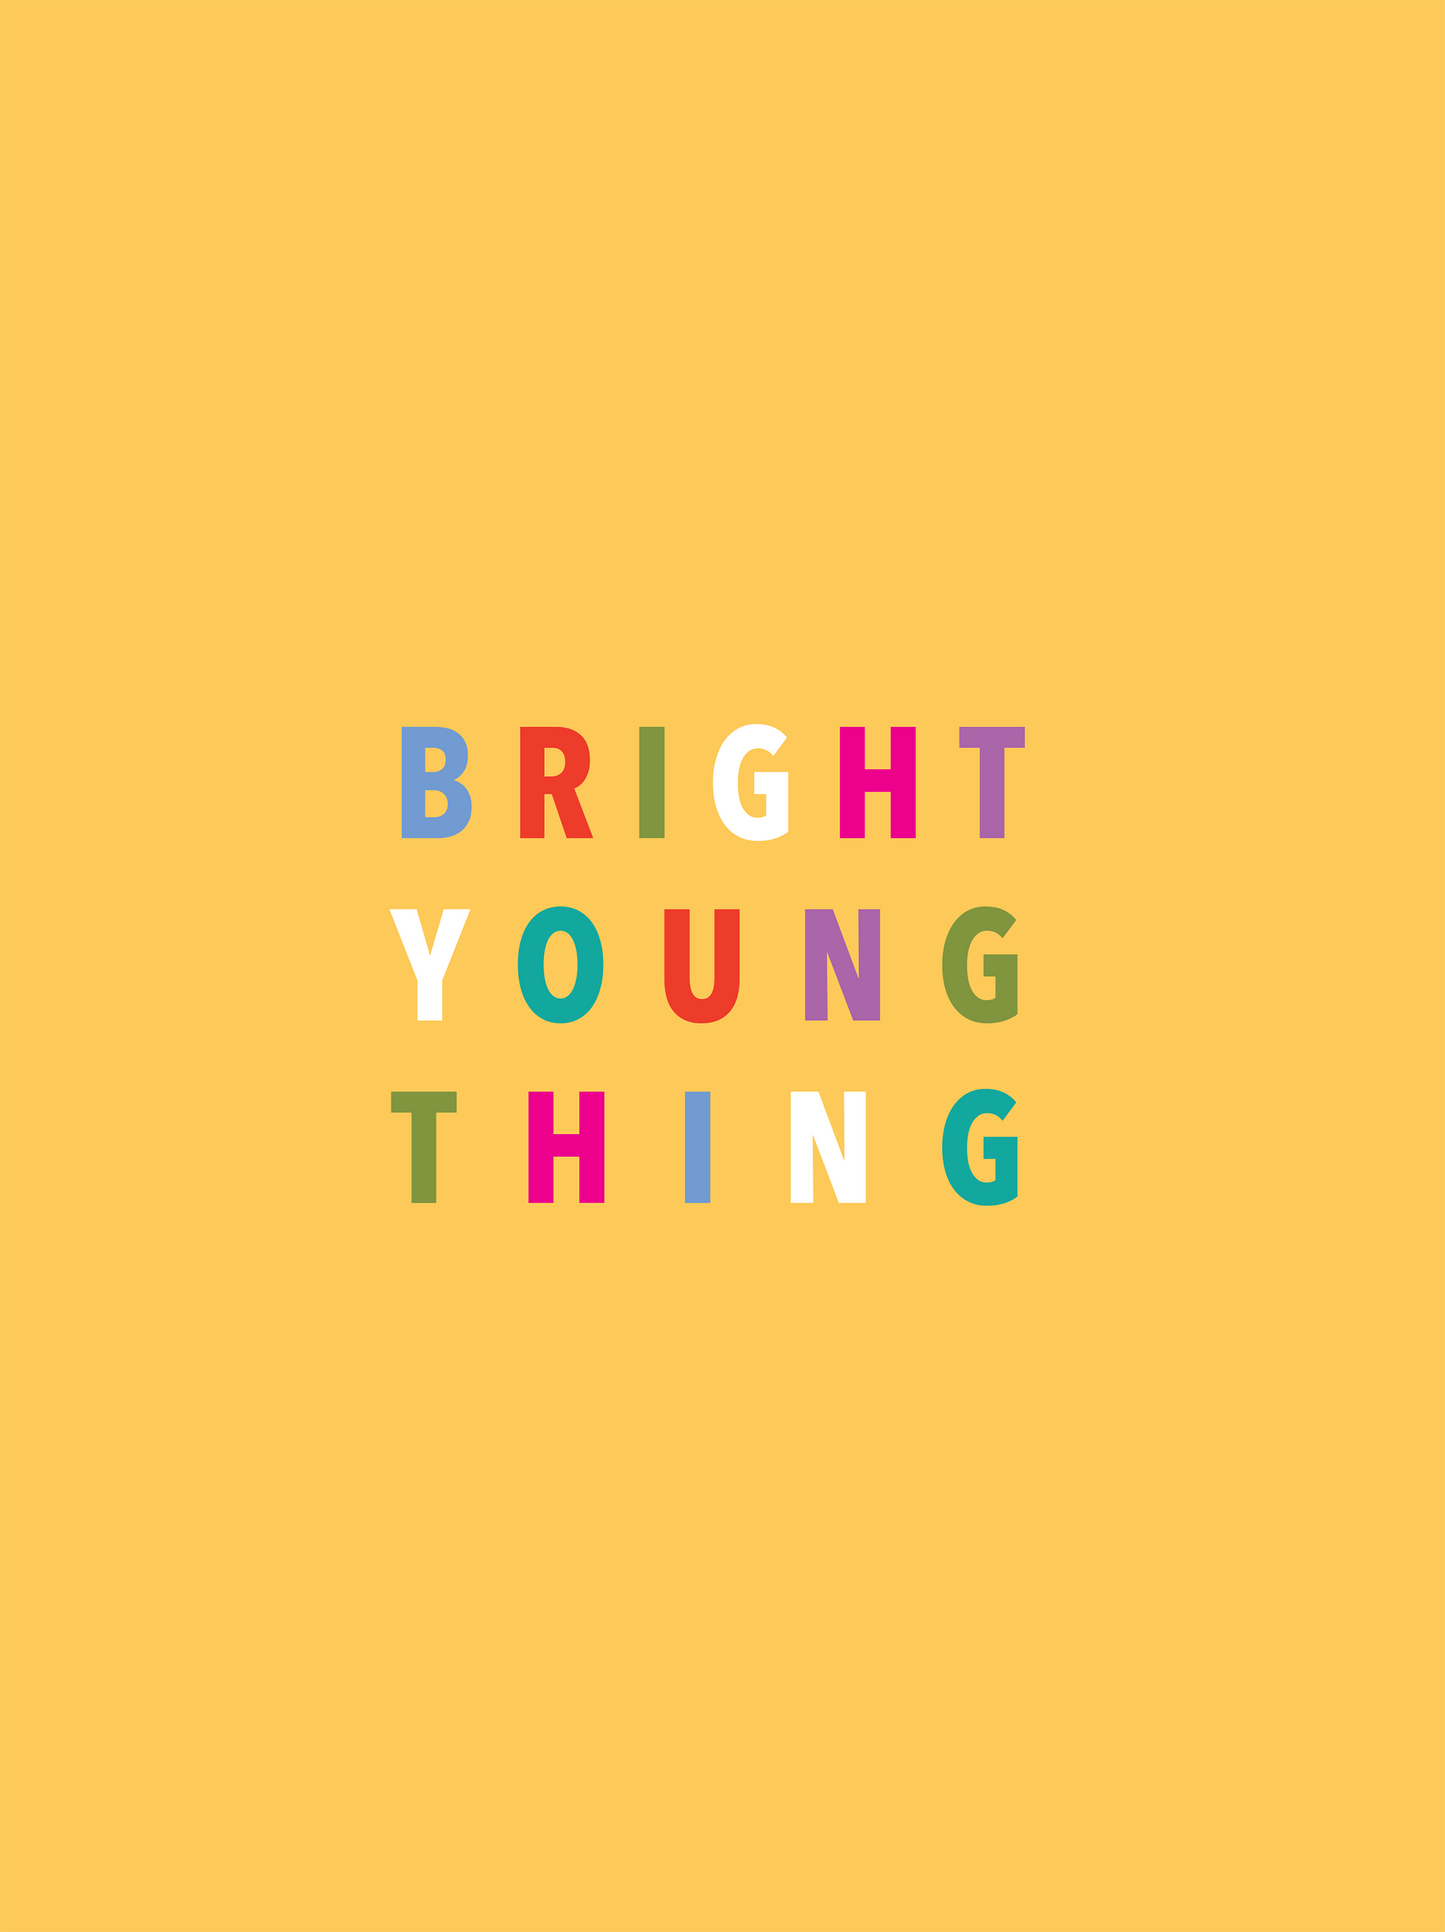 BRIGHT YOUNG THING POSTER – YELLOW